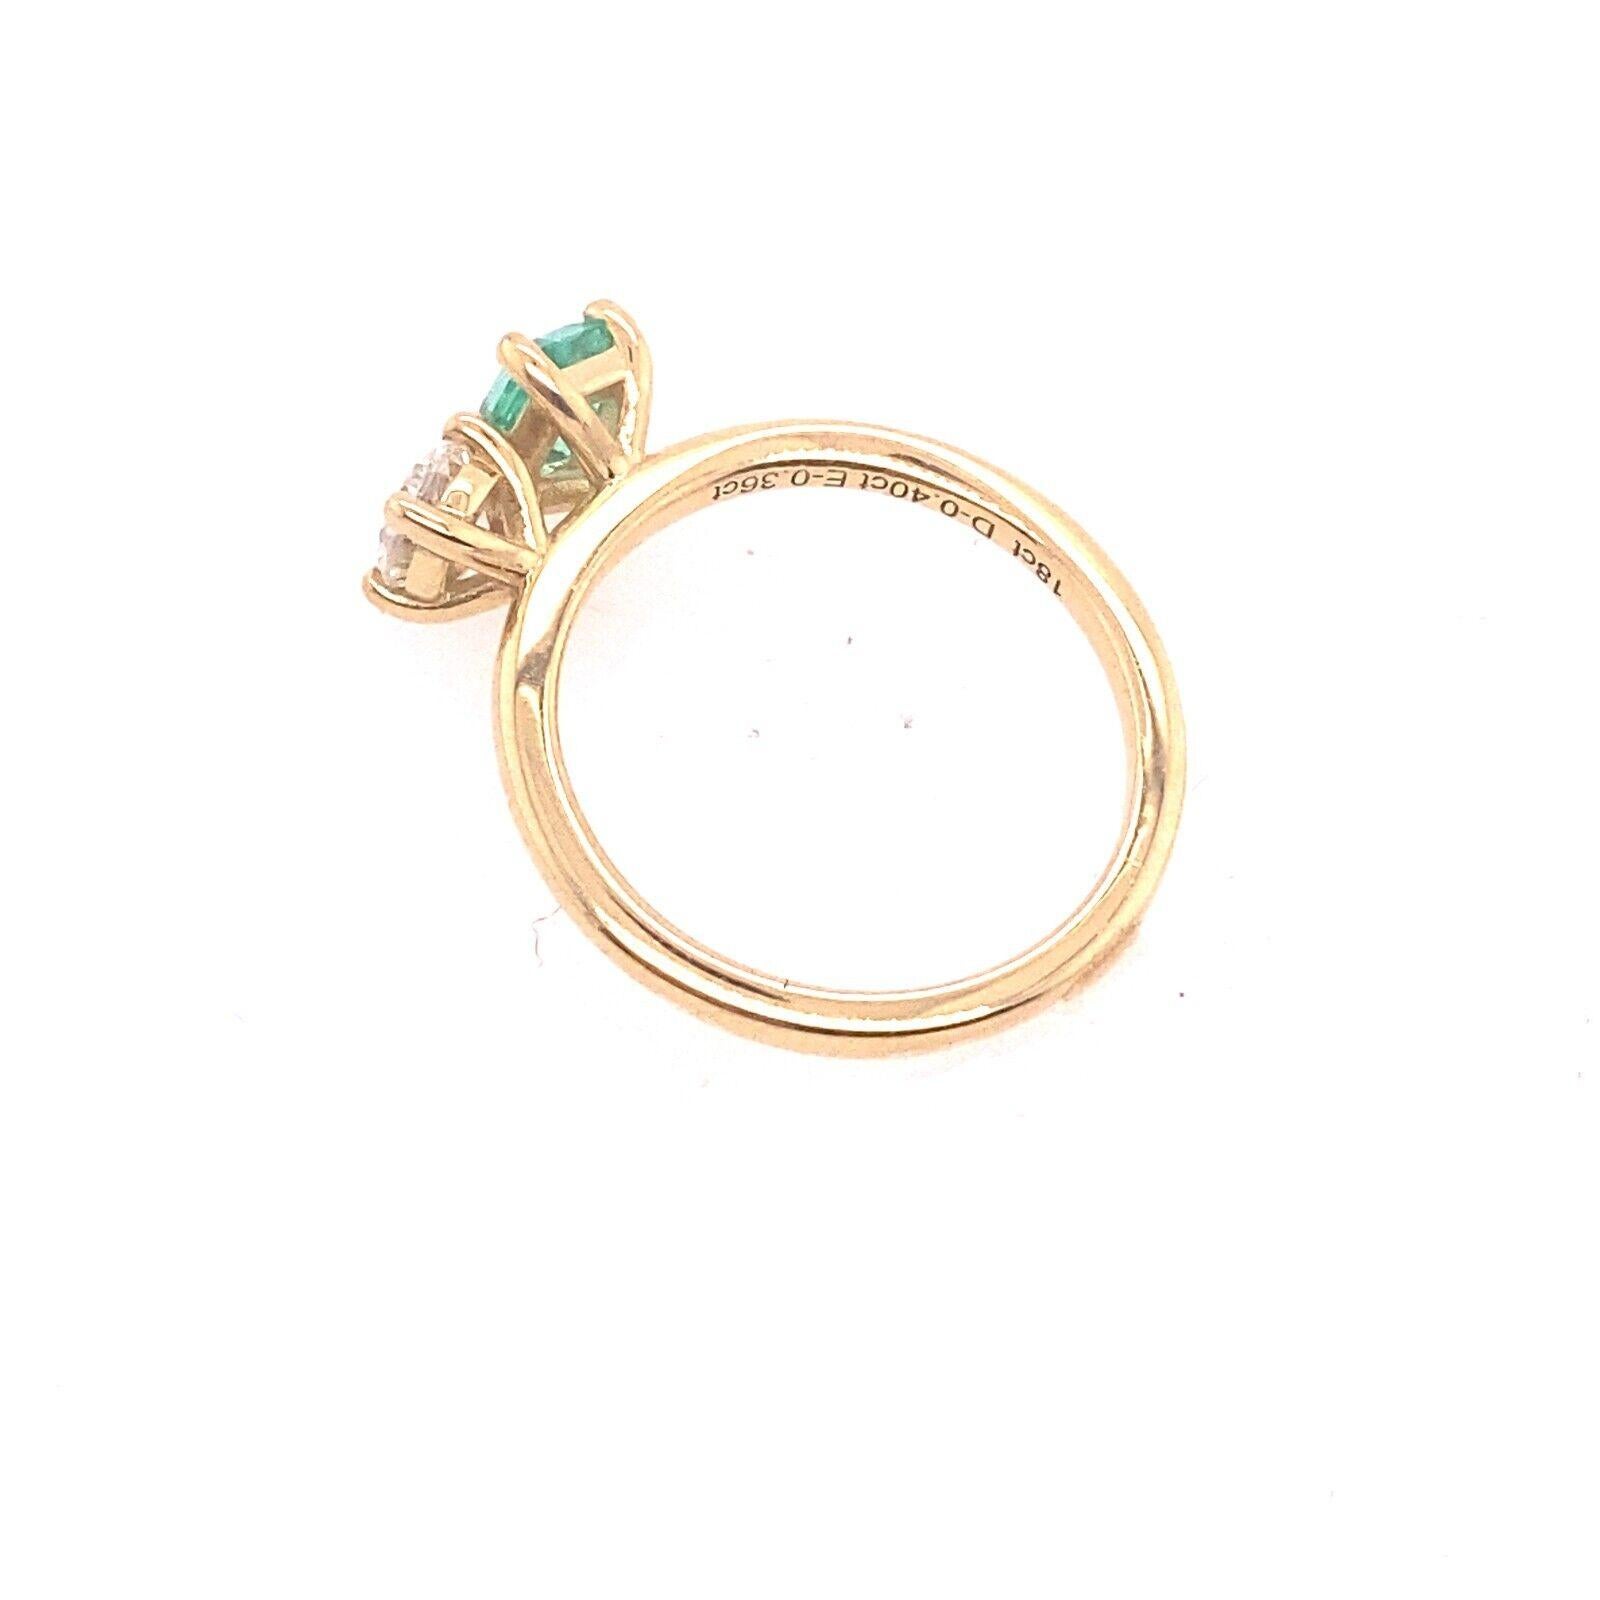 EGL cert Baguette Emerald &0.40ct Natural Diamond Ring, Set In 18ct Yellow Gold
Elegance and style combine in this magnificent Emerald and Diamond ring. Adorned with a 0.36ct baguette cut Emerald and a 0.40ct natural Round Brilliant Cut Diamond,